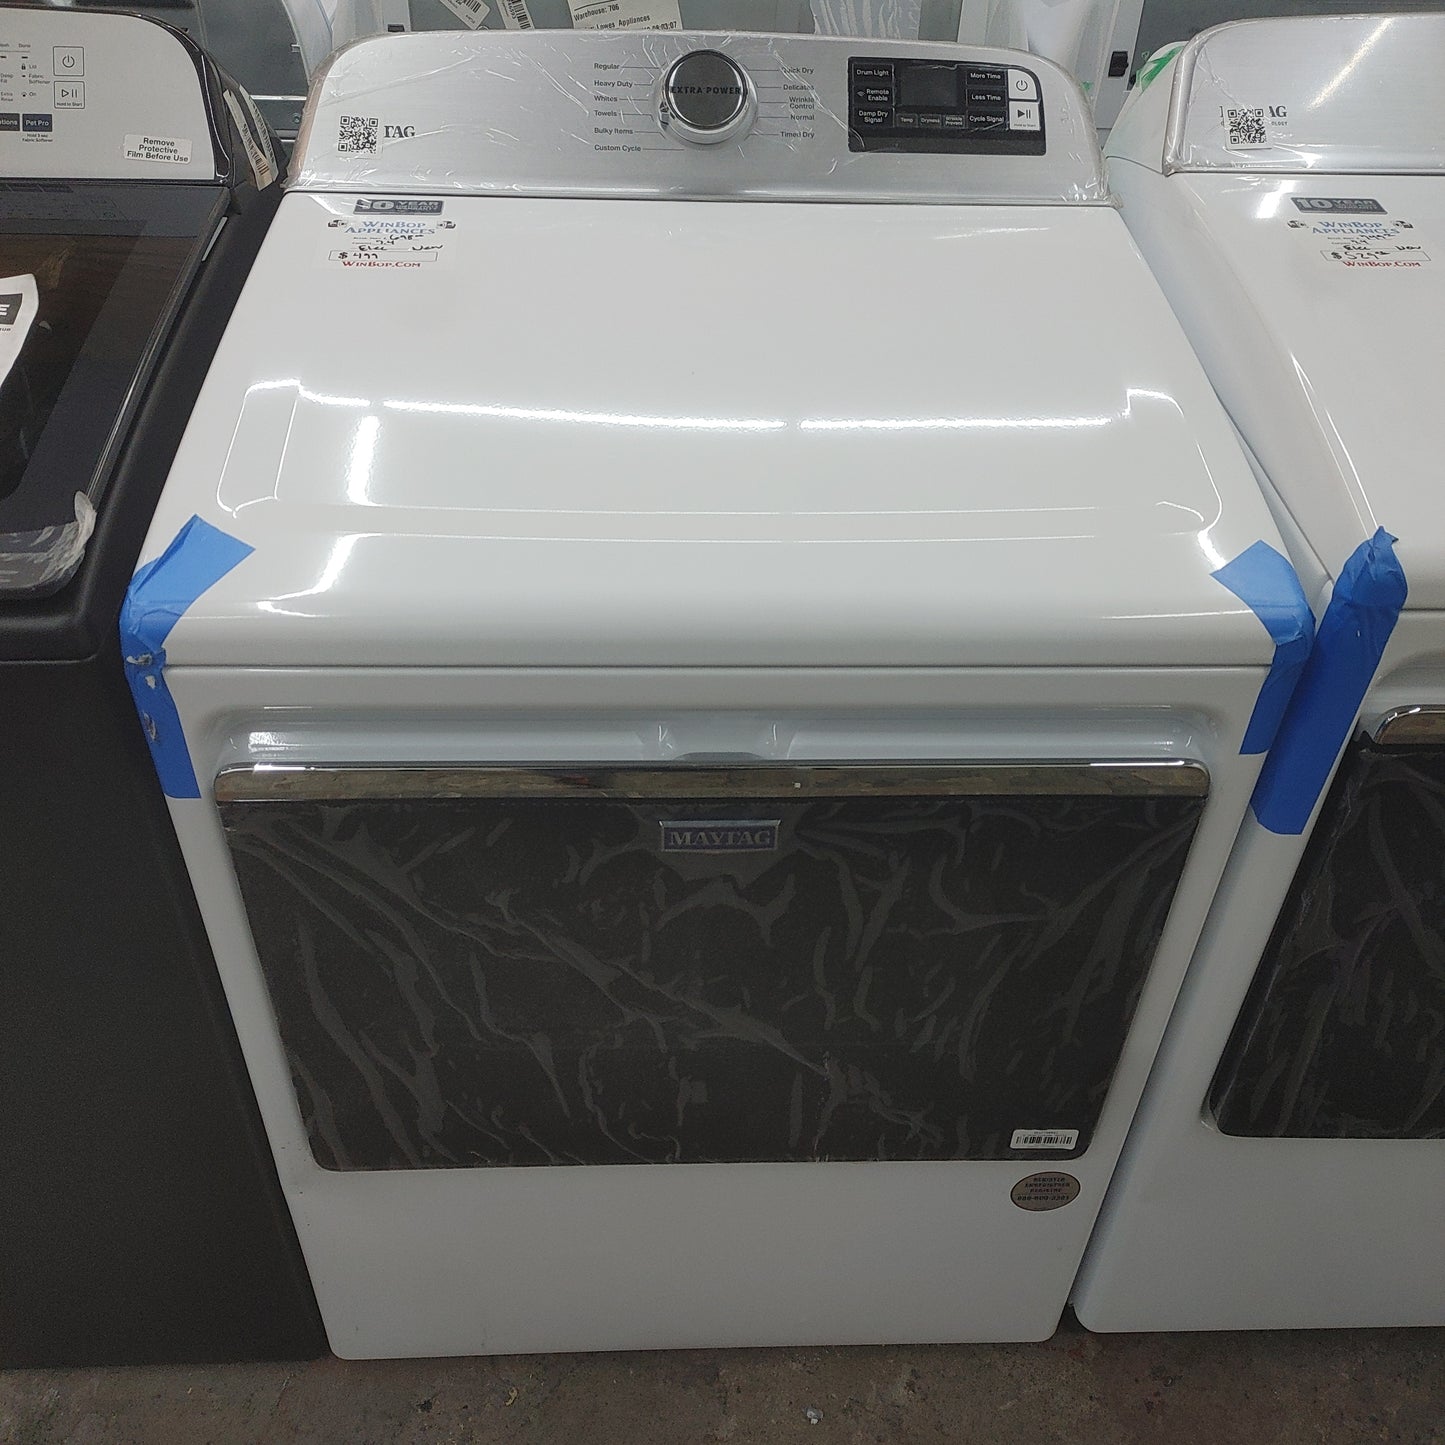 New Maytag 7.4 cubic ft Electric Dryer